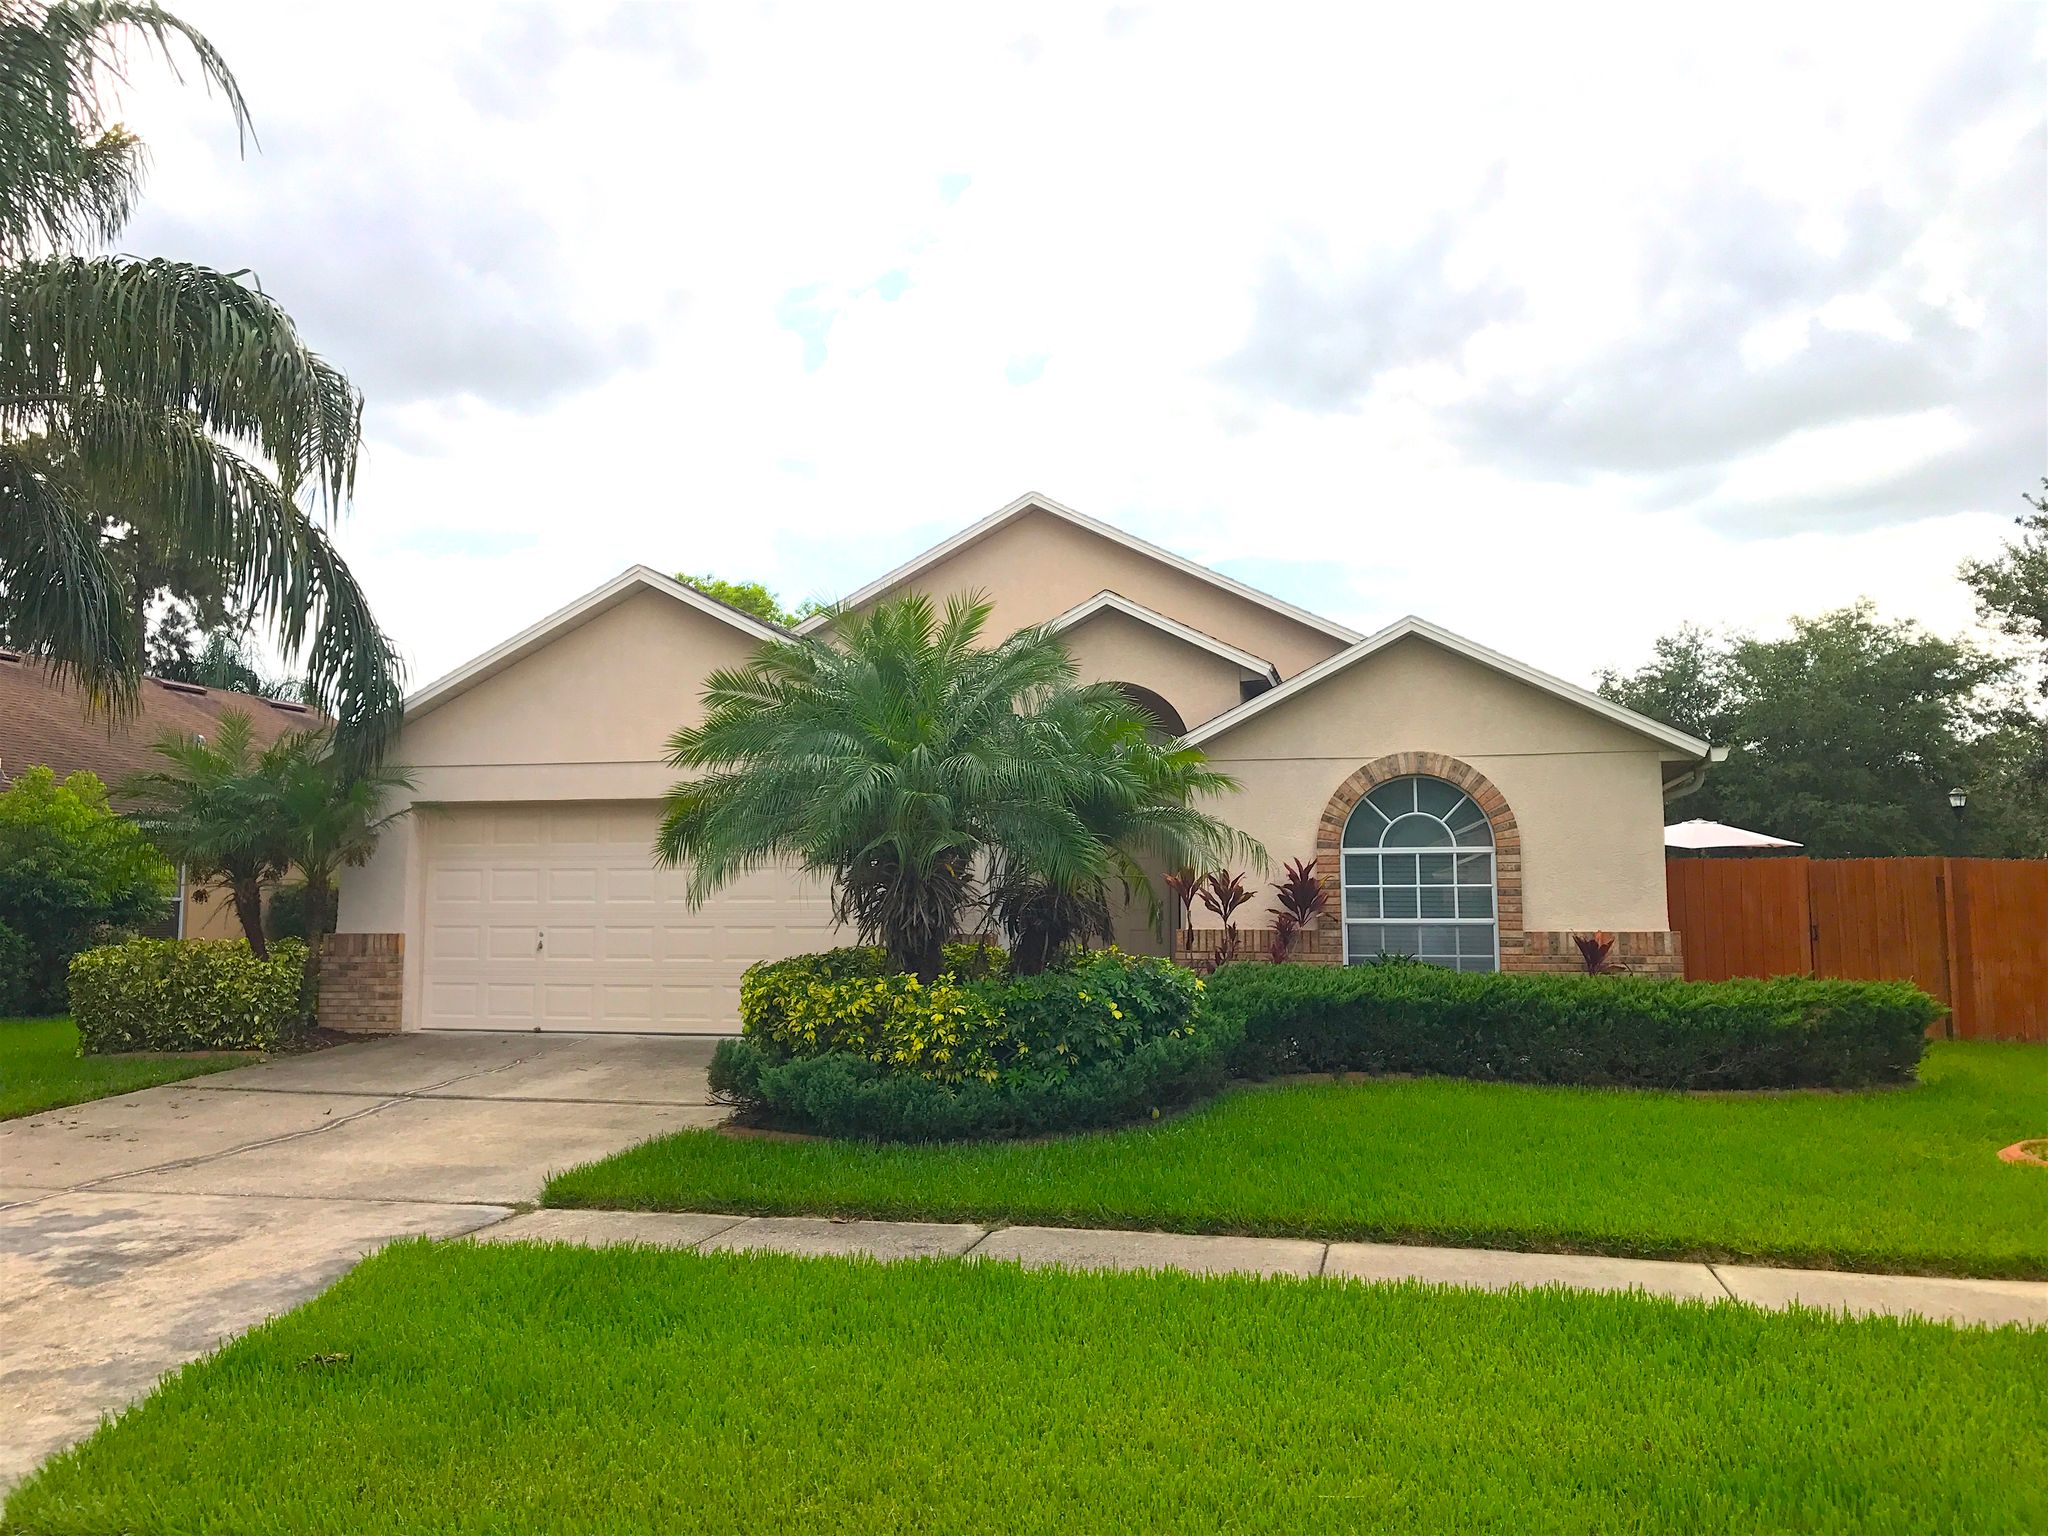 homes for sale in riverview fl